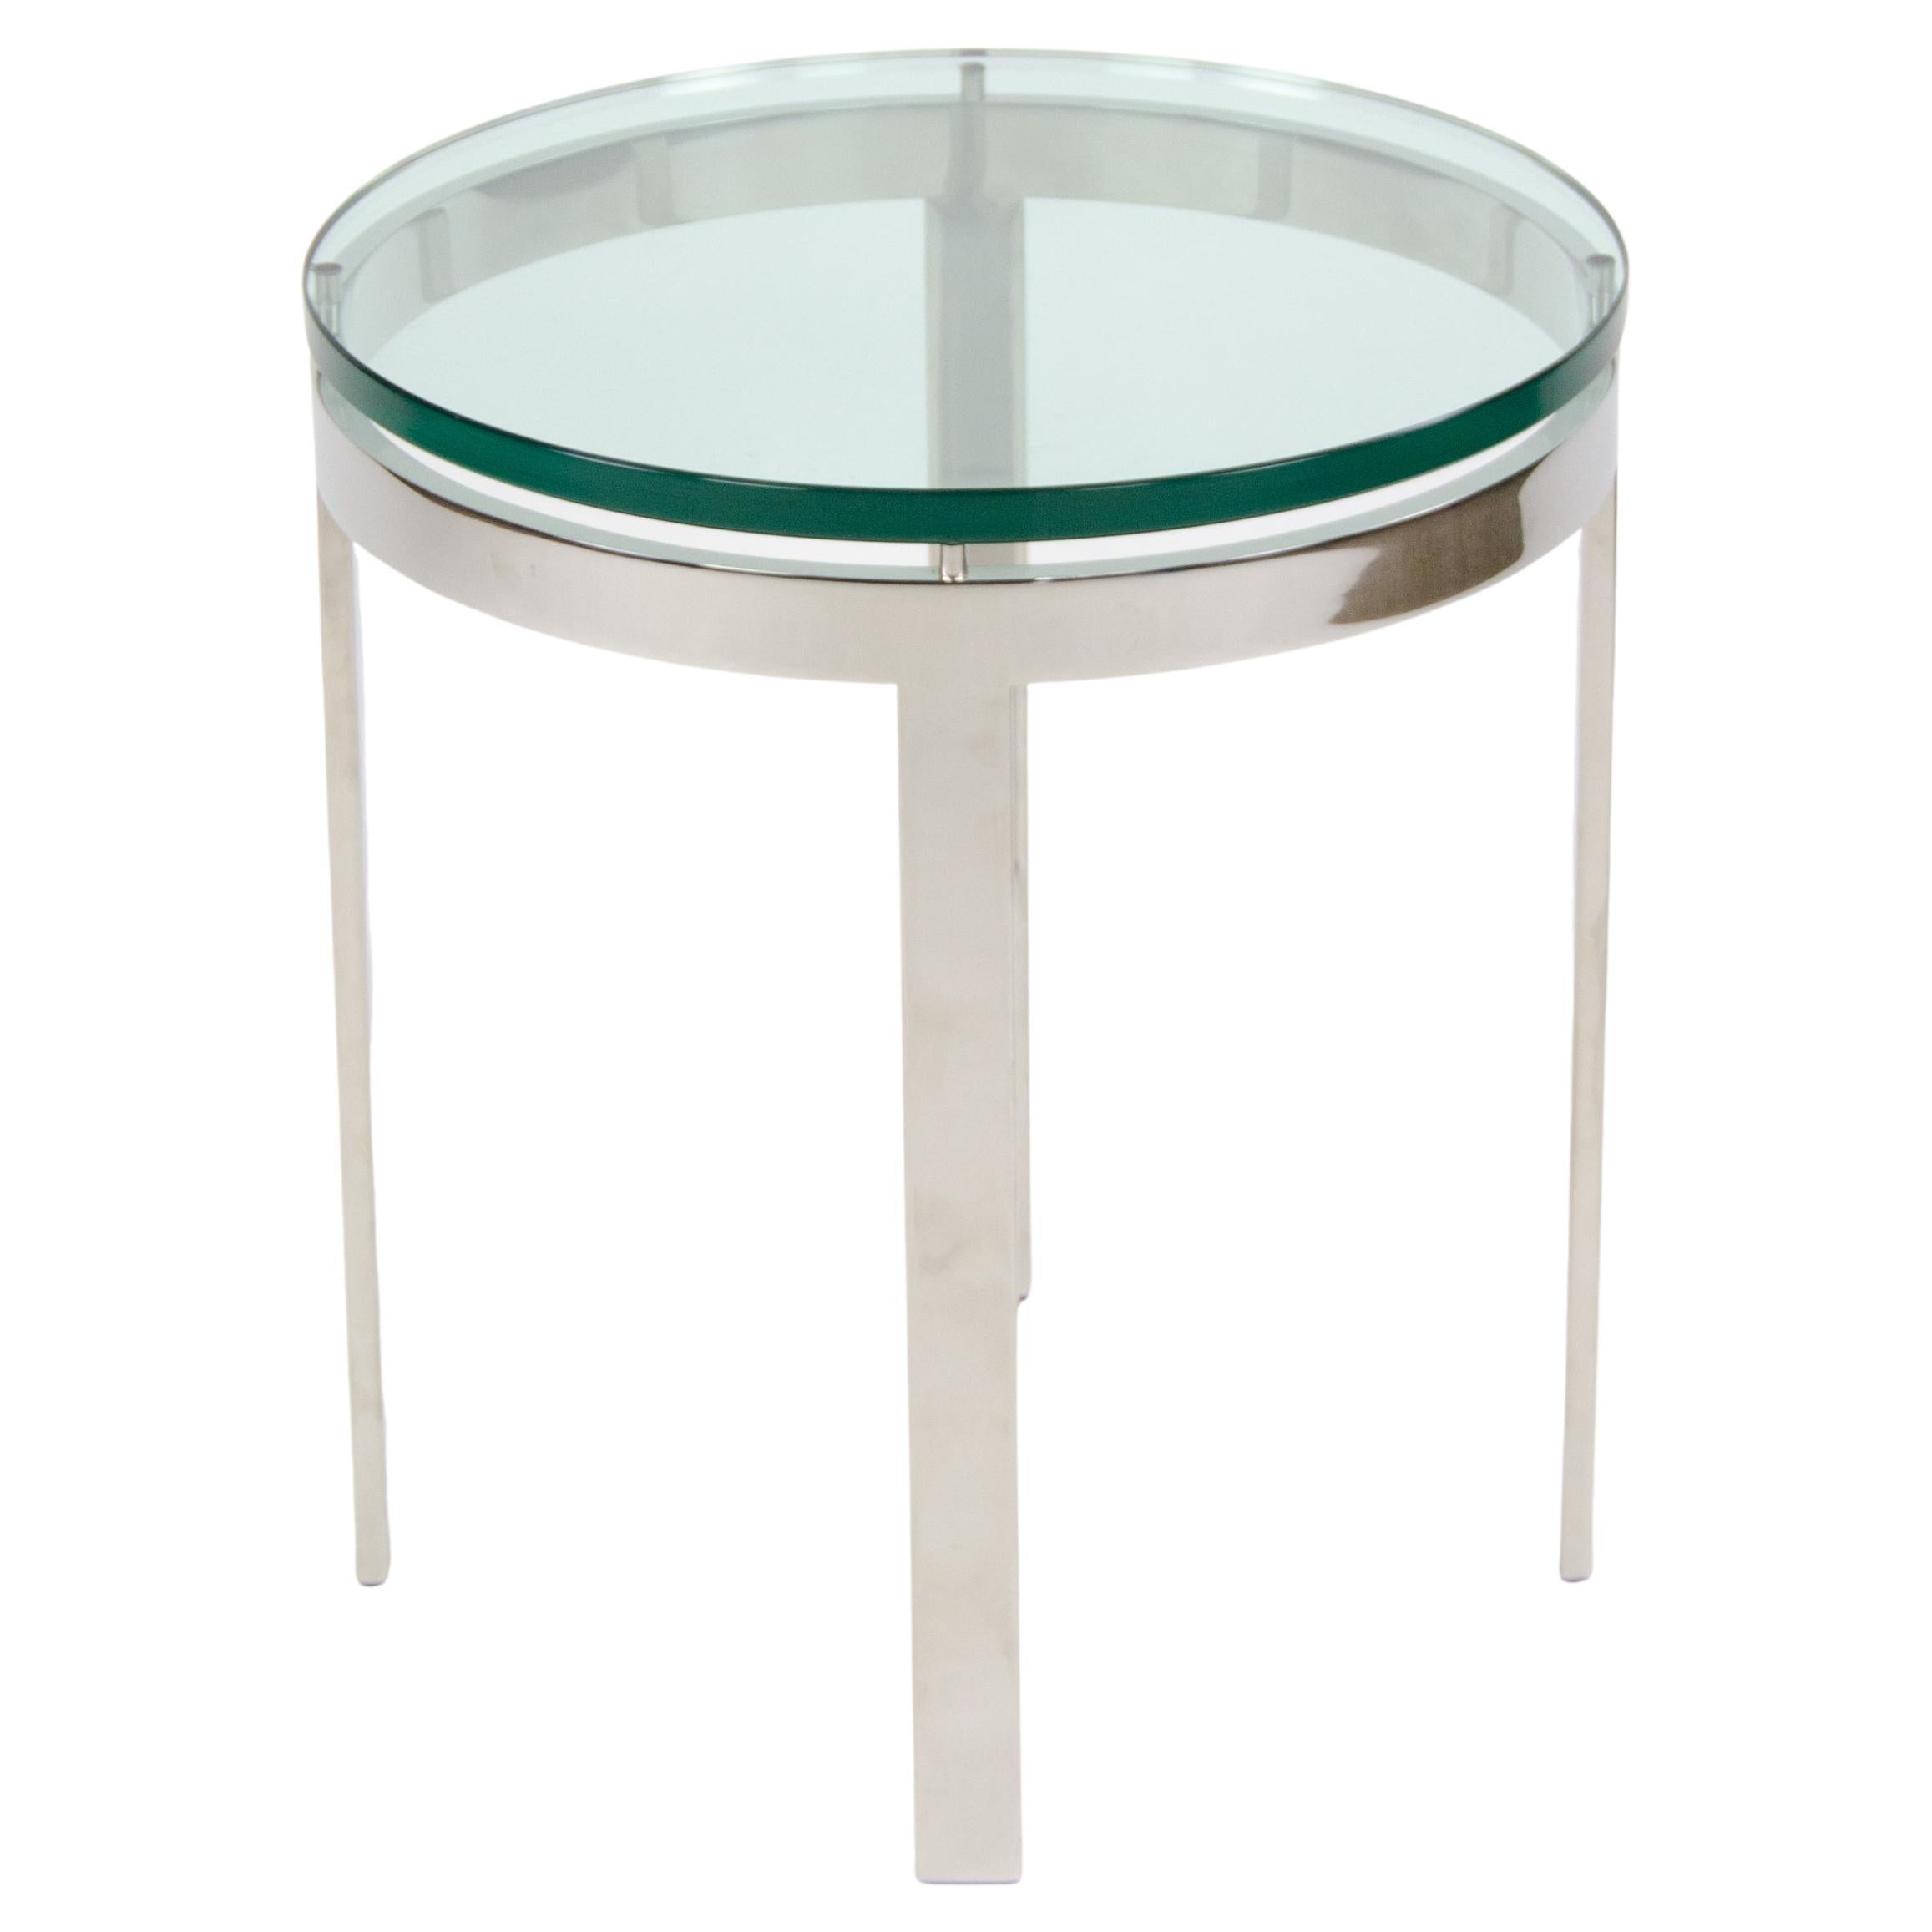 Nicos Zographos Designs Limited Glass Stainless Side Table from SOM Project For Sale